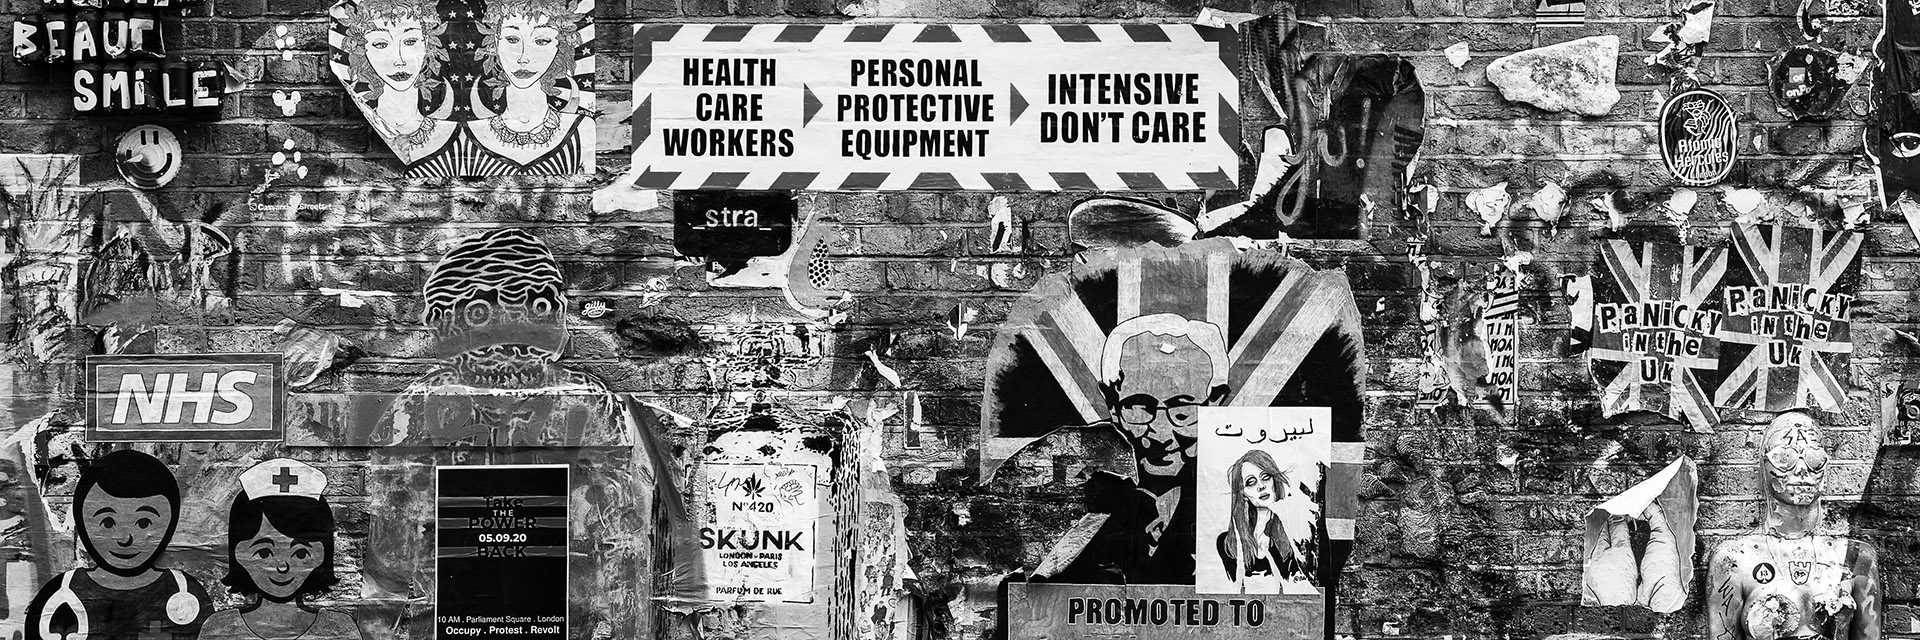 Signs Covid 19 in London Mural